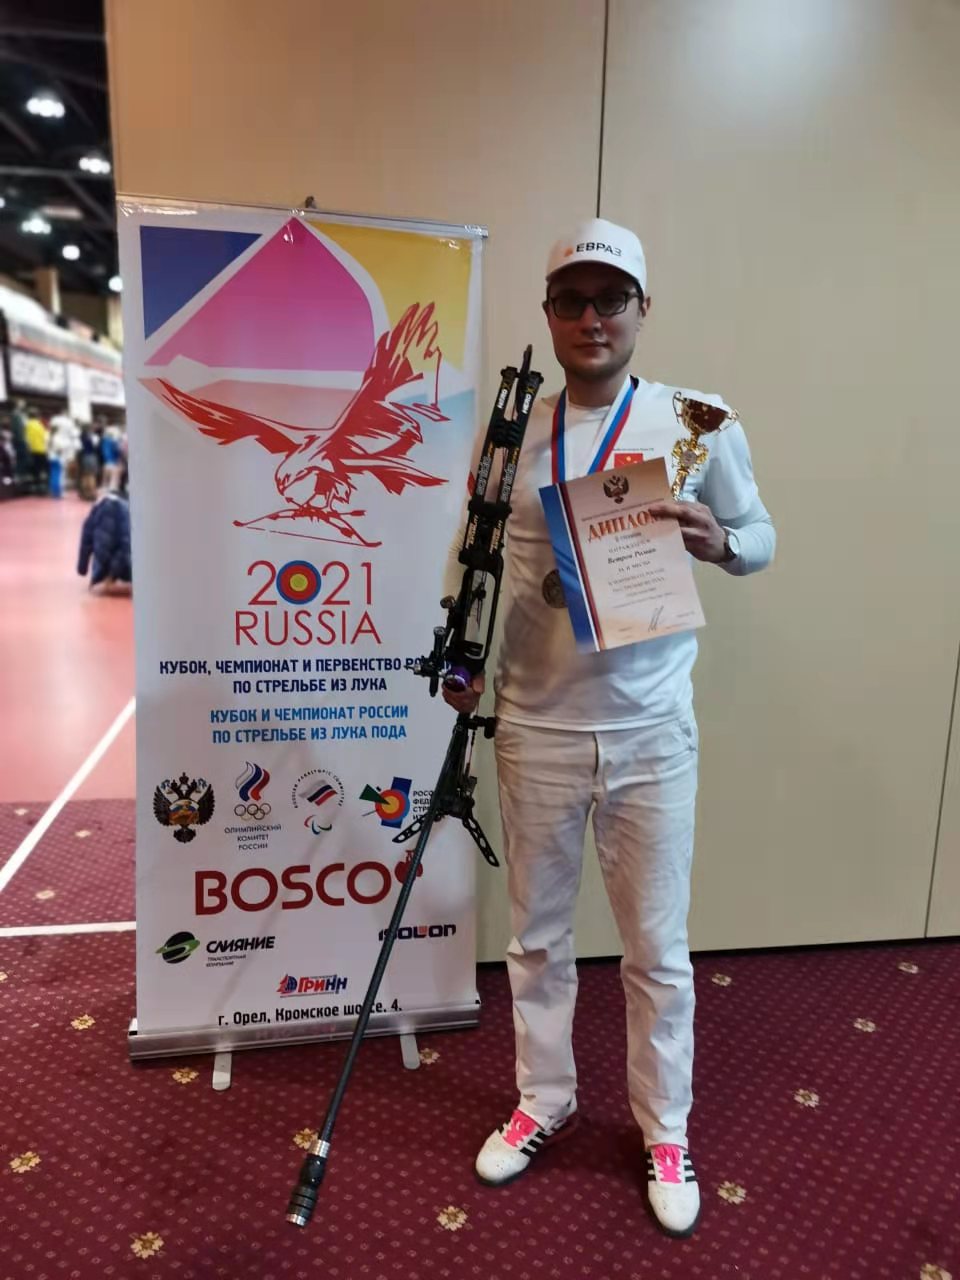 Hero X10 bow won silver medal in Russian Championship 2021 